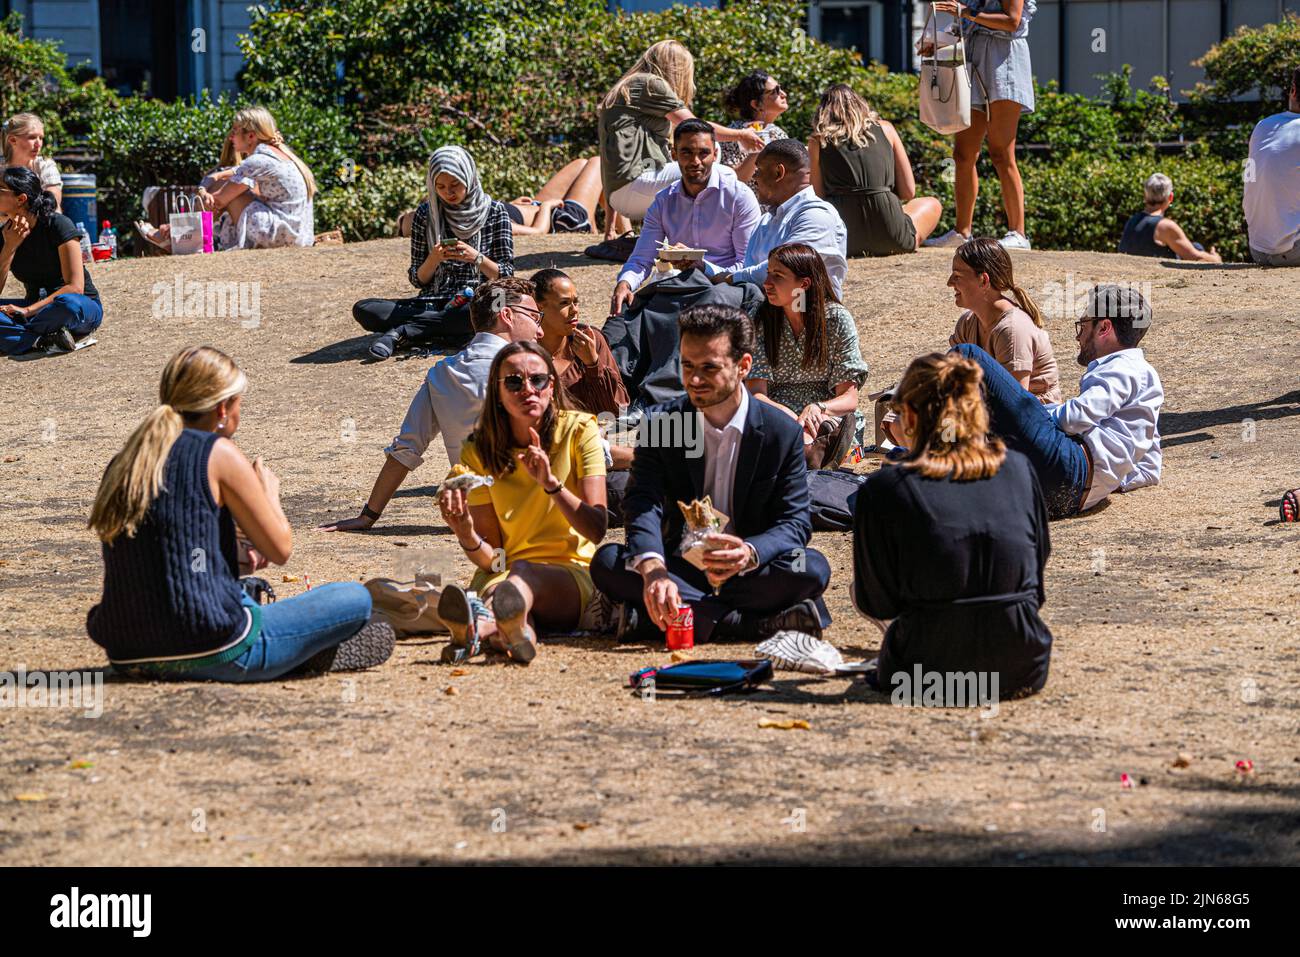 London, UK. 9 August 2022   Office workers enjoying the sunshine on the parched grass in Cavendish square London. The Uk health security agency has issued a warning as England is placed on a level 3 health alert  temperatures are expected to soar to mid 30's celsius for the next week.   Credit. amer ghazzal/Alamy Live News Stock Photo